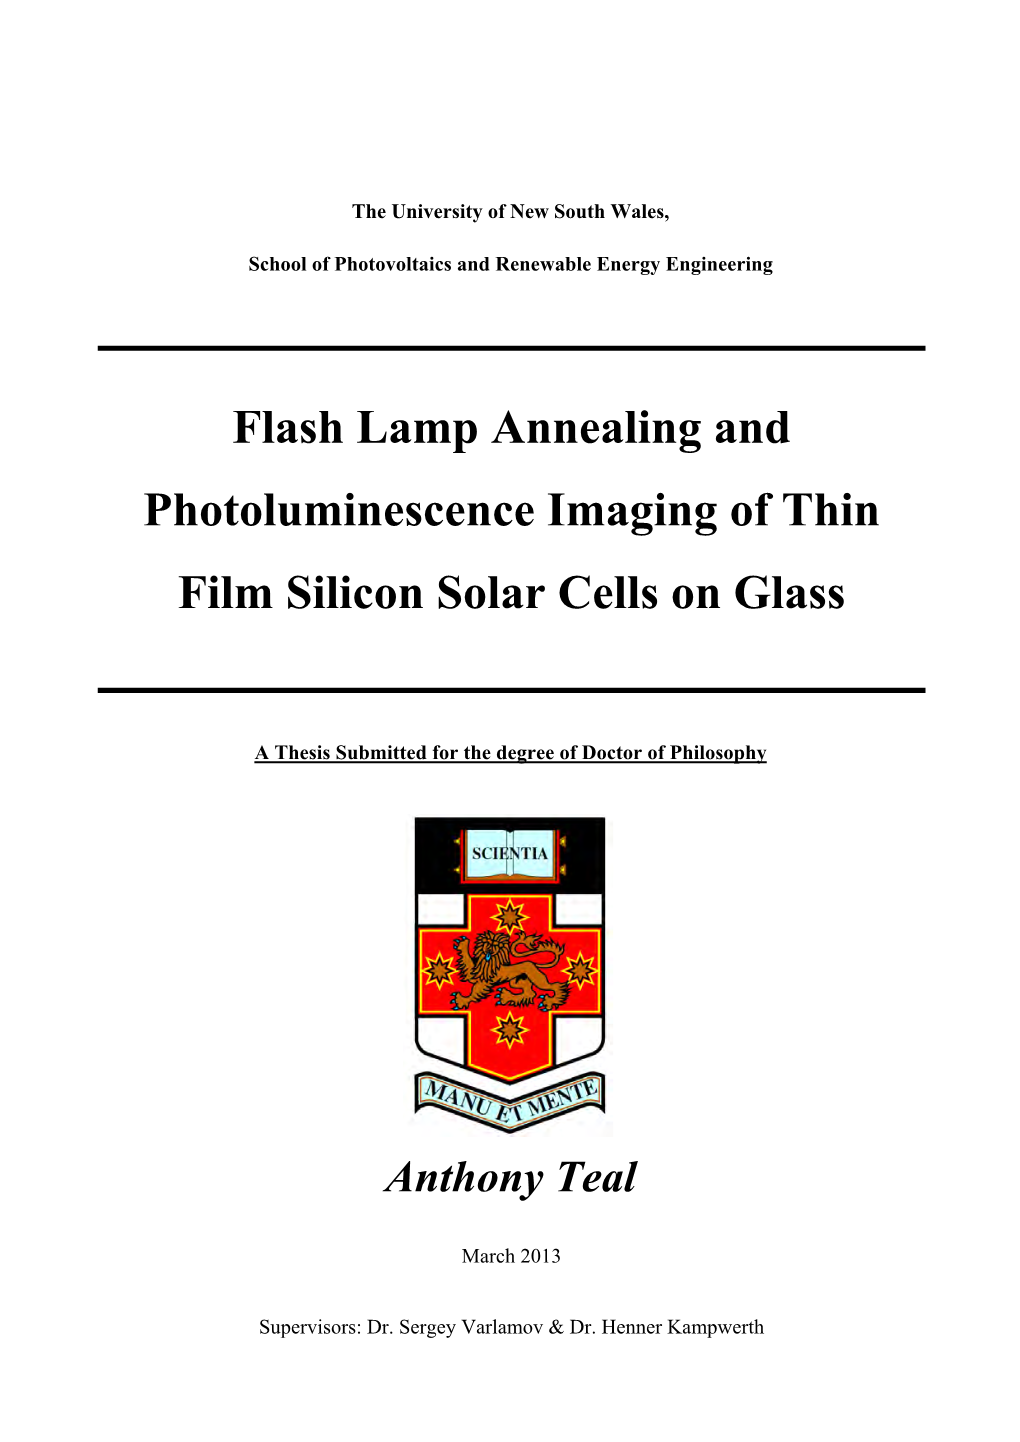 Flash Lamp Annealing and Photoluminescence Imaging of Thin Film Silicon Solar Cells on Glass